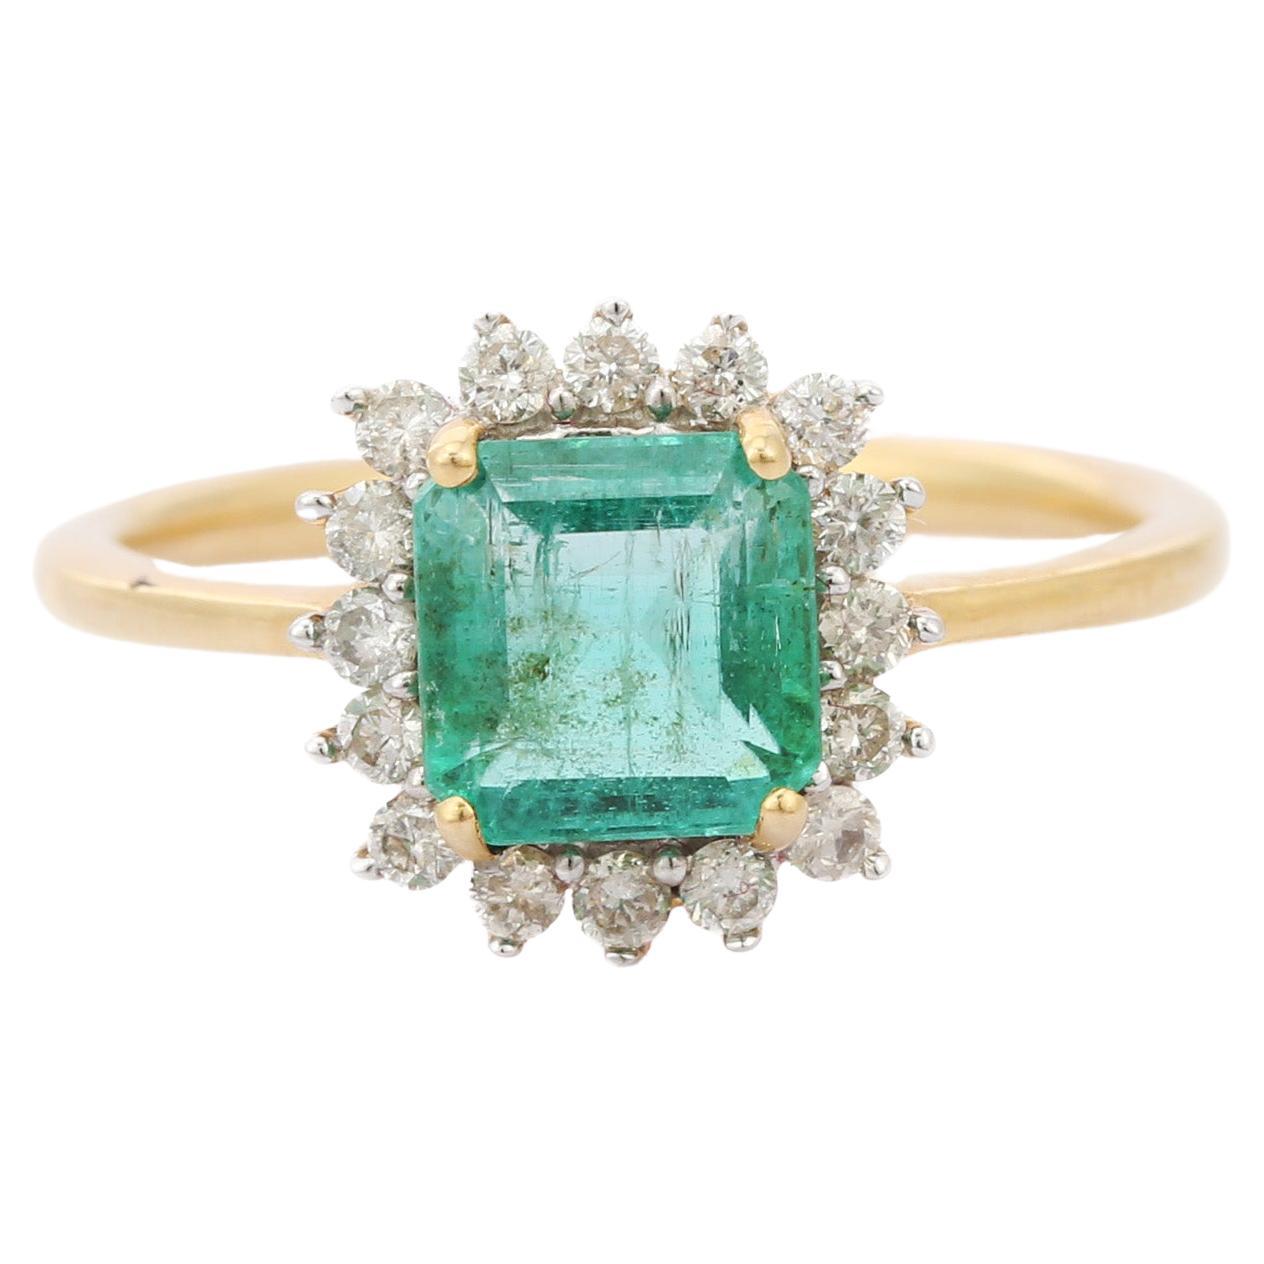 For Sale:  Designer Emerald and Diamond Bridal Ring in 18K Yellow Gold